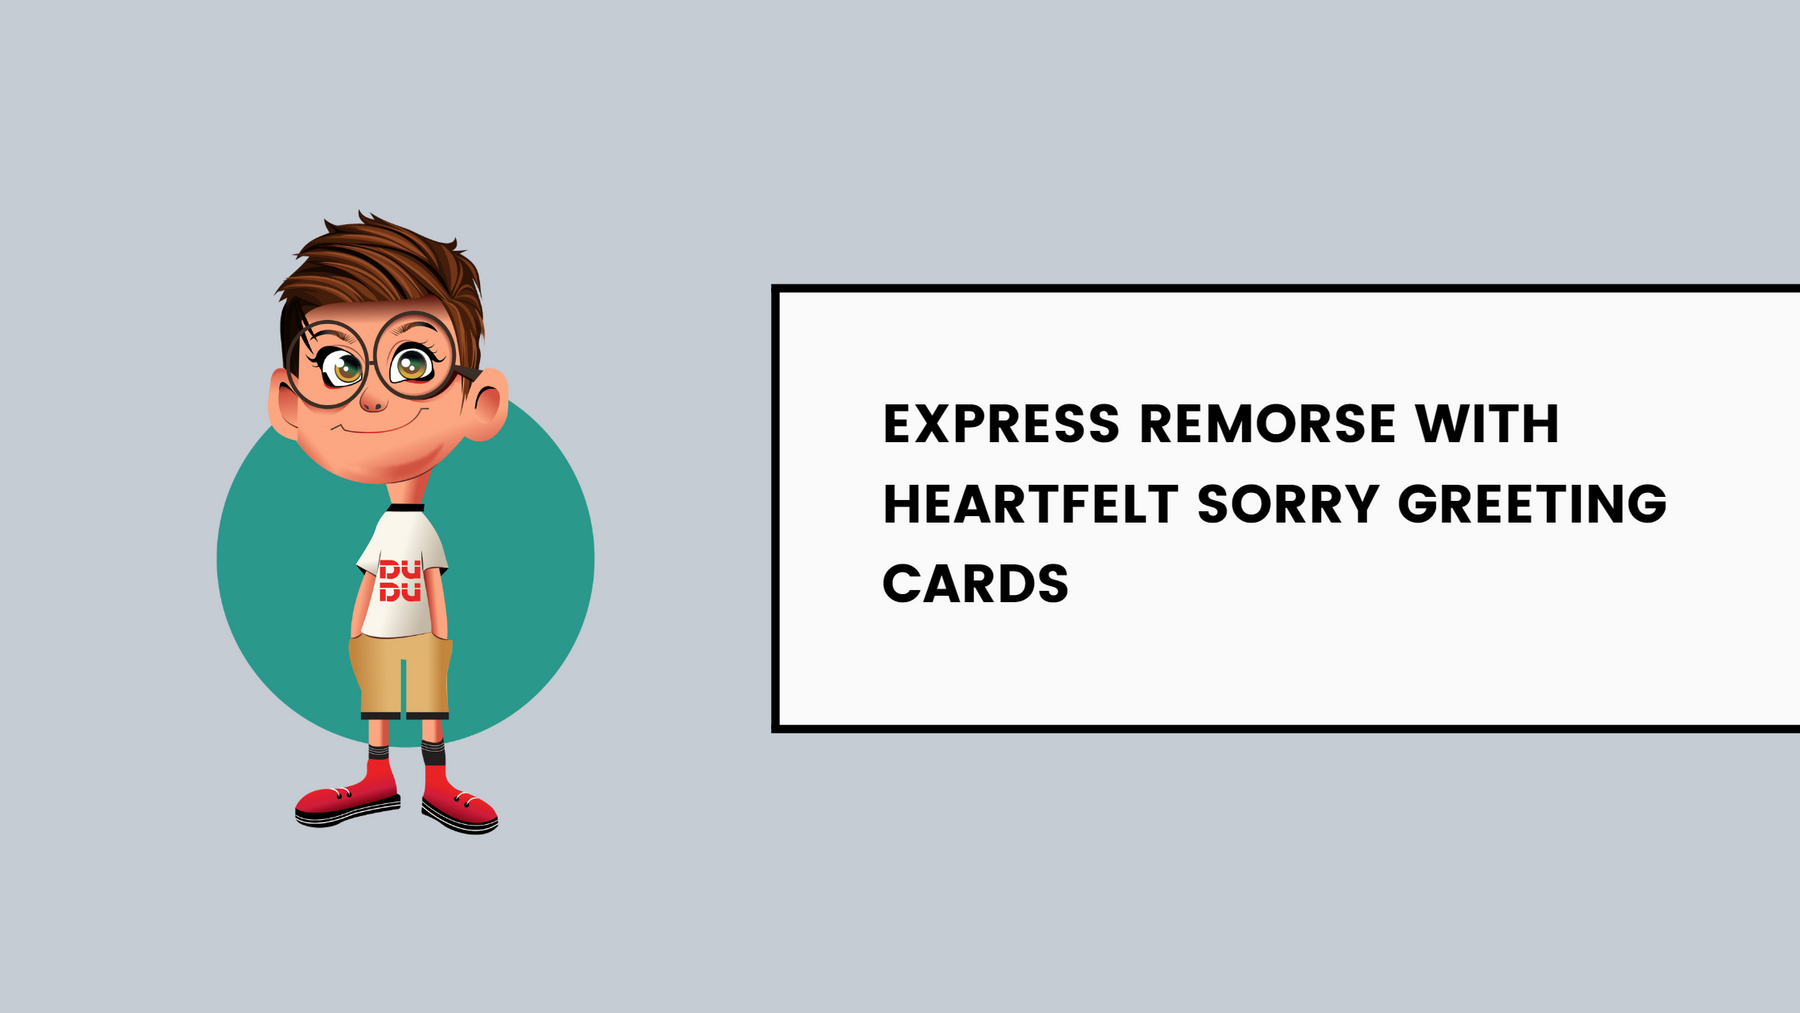 Express remorse with heartfelt sorry greeting cards